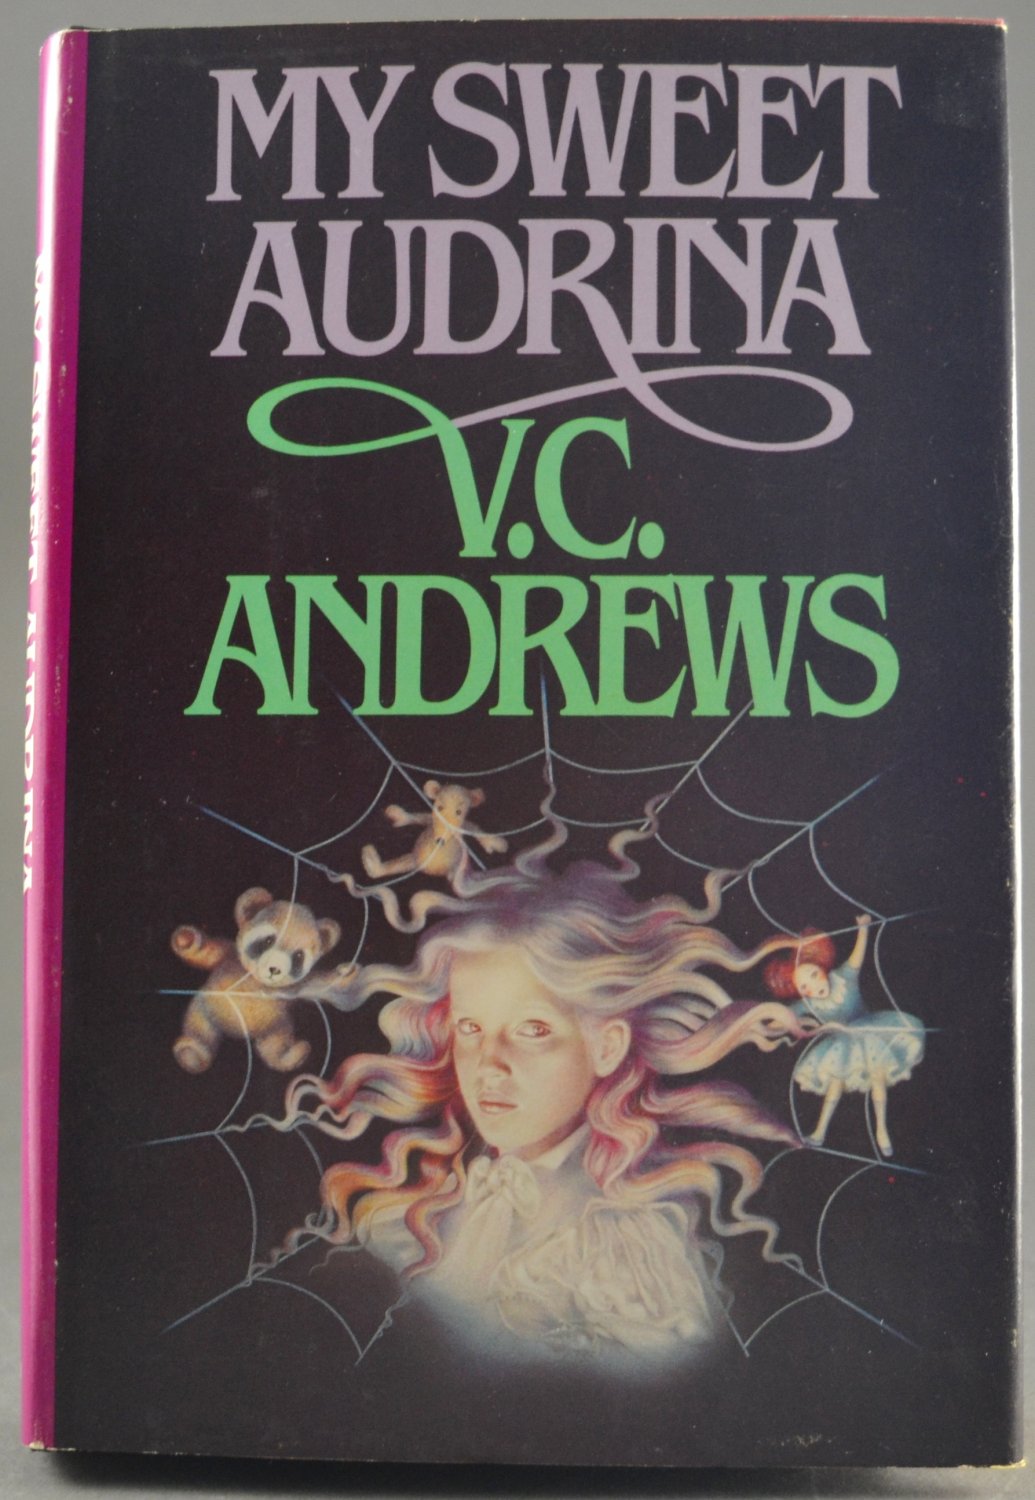 my sweet audrina by vc andrews